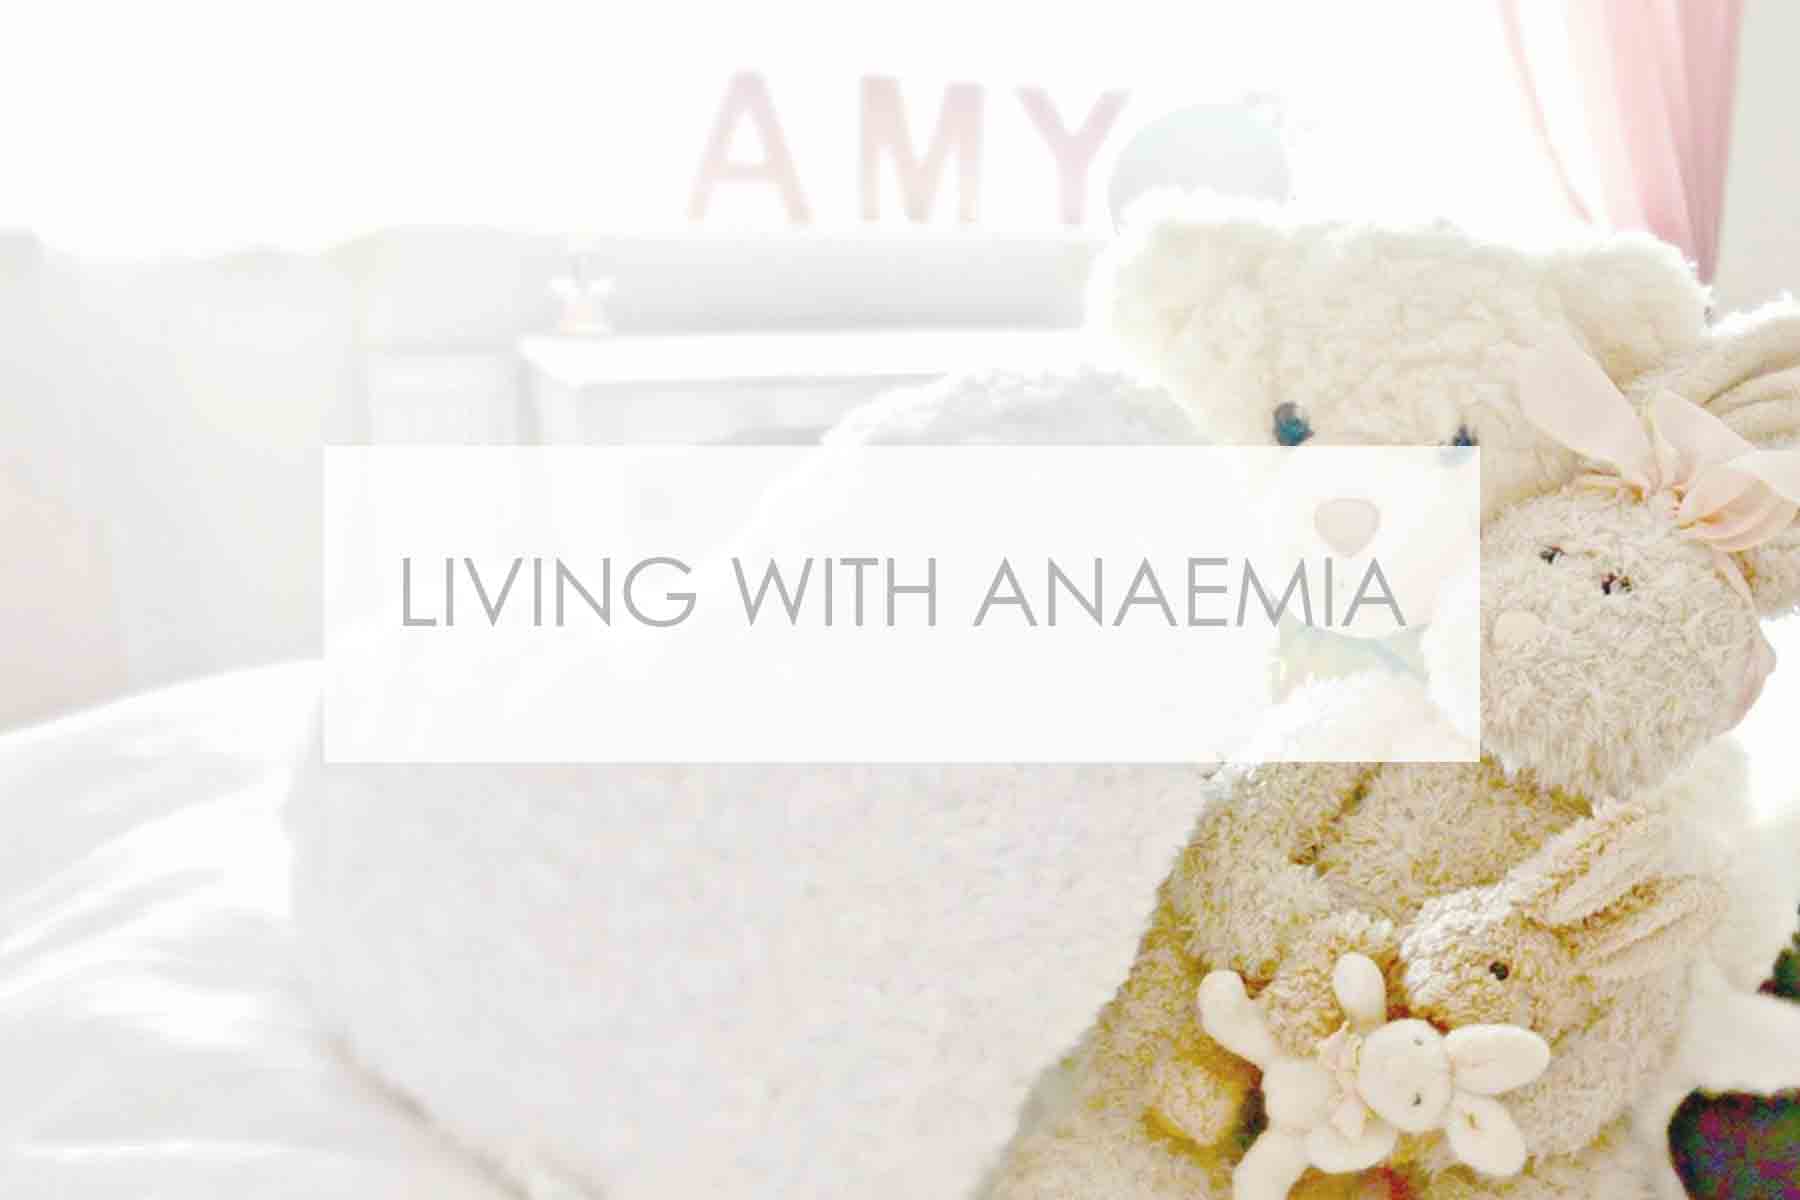 http://www.amyelizabethfashion.com/blogposts/2017/12/29/the-things-people-dont-tell-you-about-living-with-anaemia